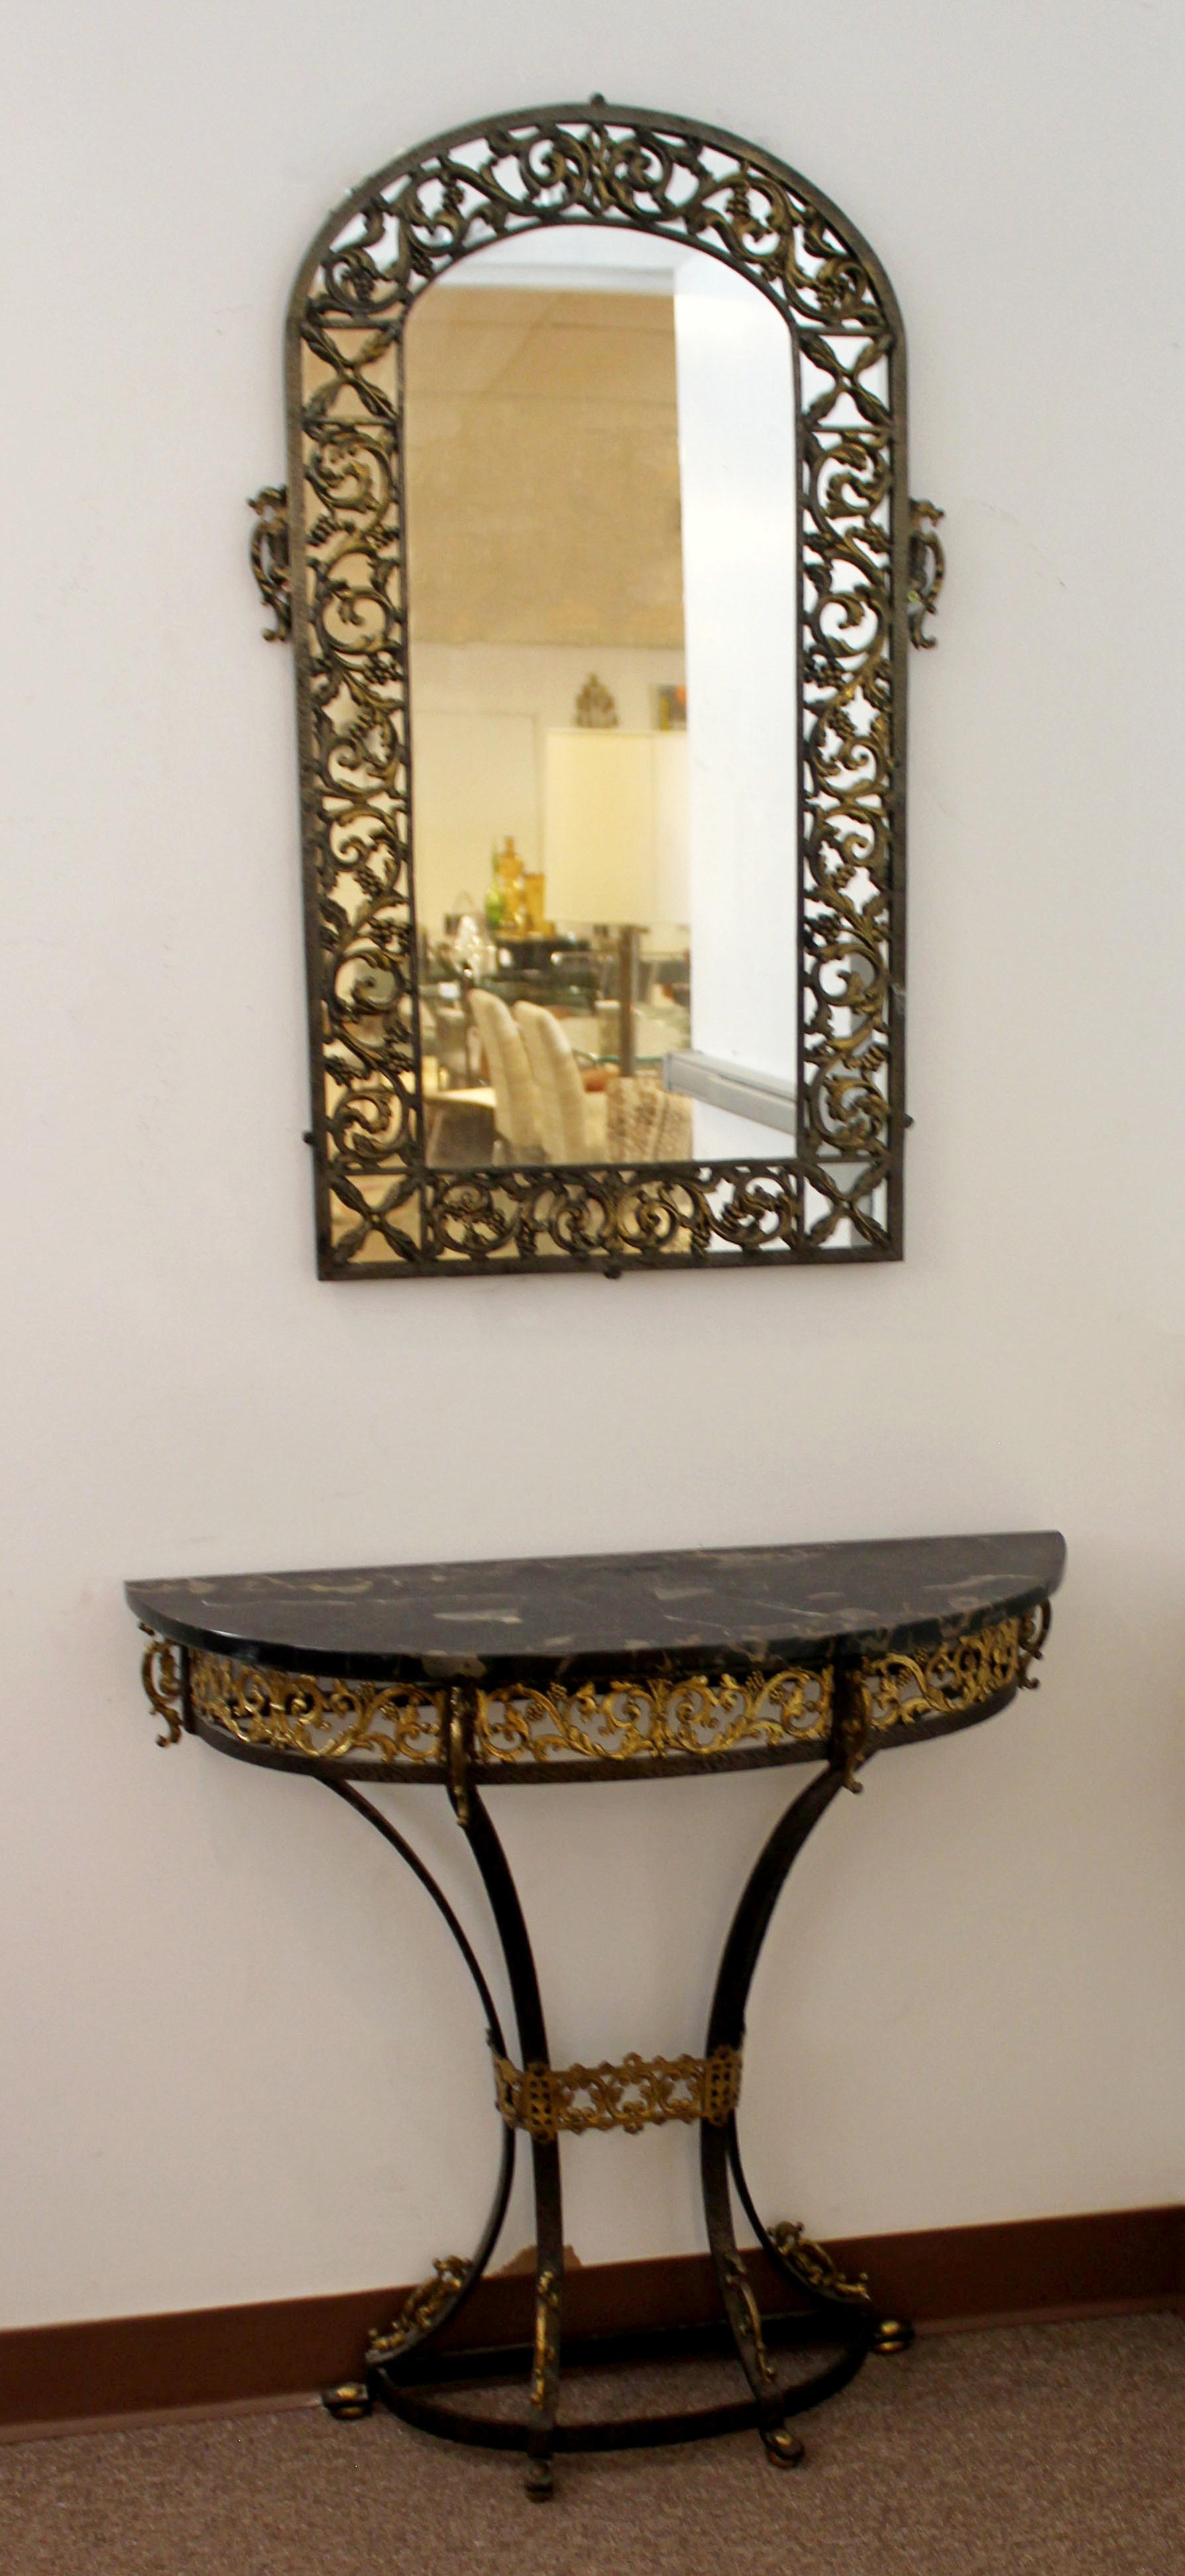 For your consideration is a stunning, hammered and gilt, wrought iron console table and matching mirror, with a black marble top, attributed to Oscar Bach, circa the 1920s. In excellent condition. The dimensions of the table are 31